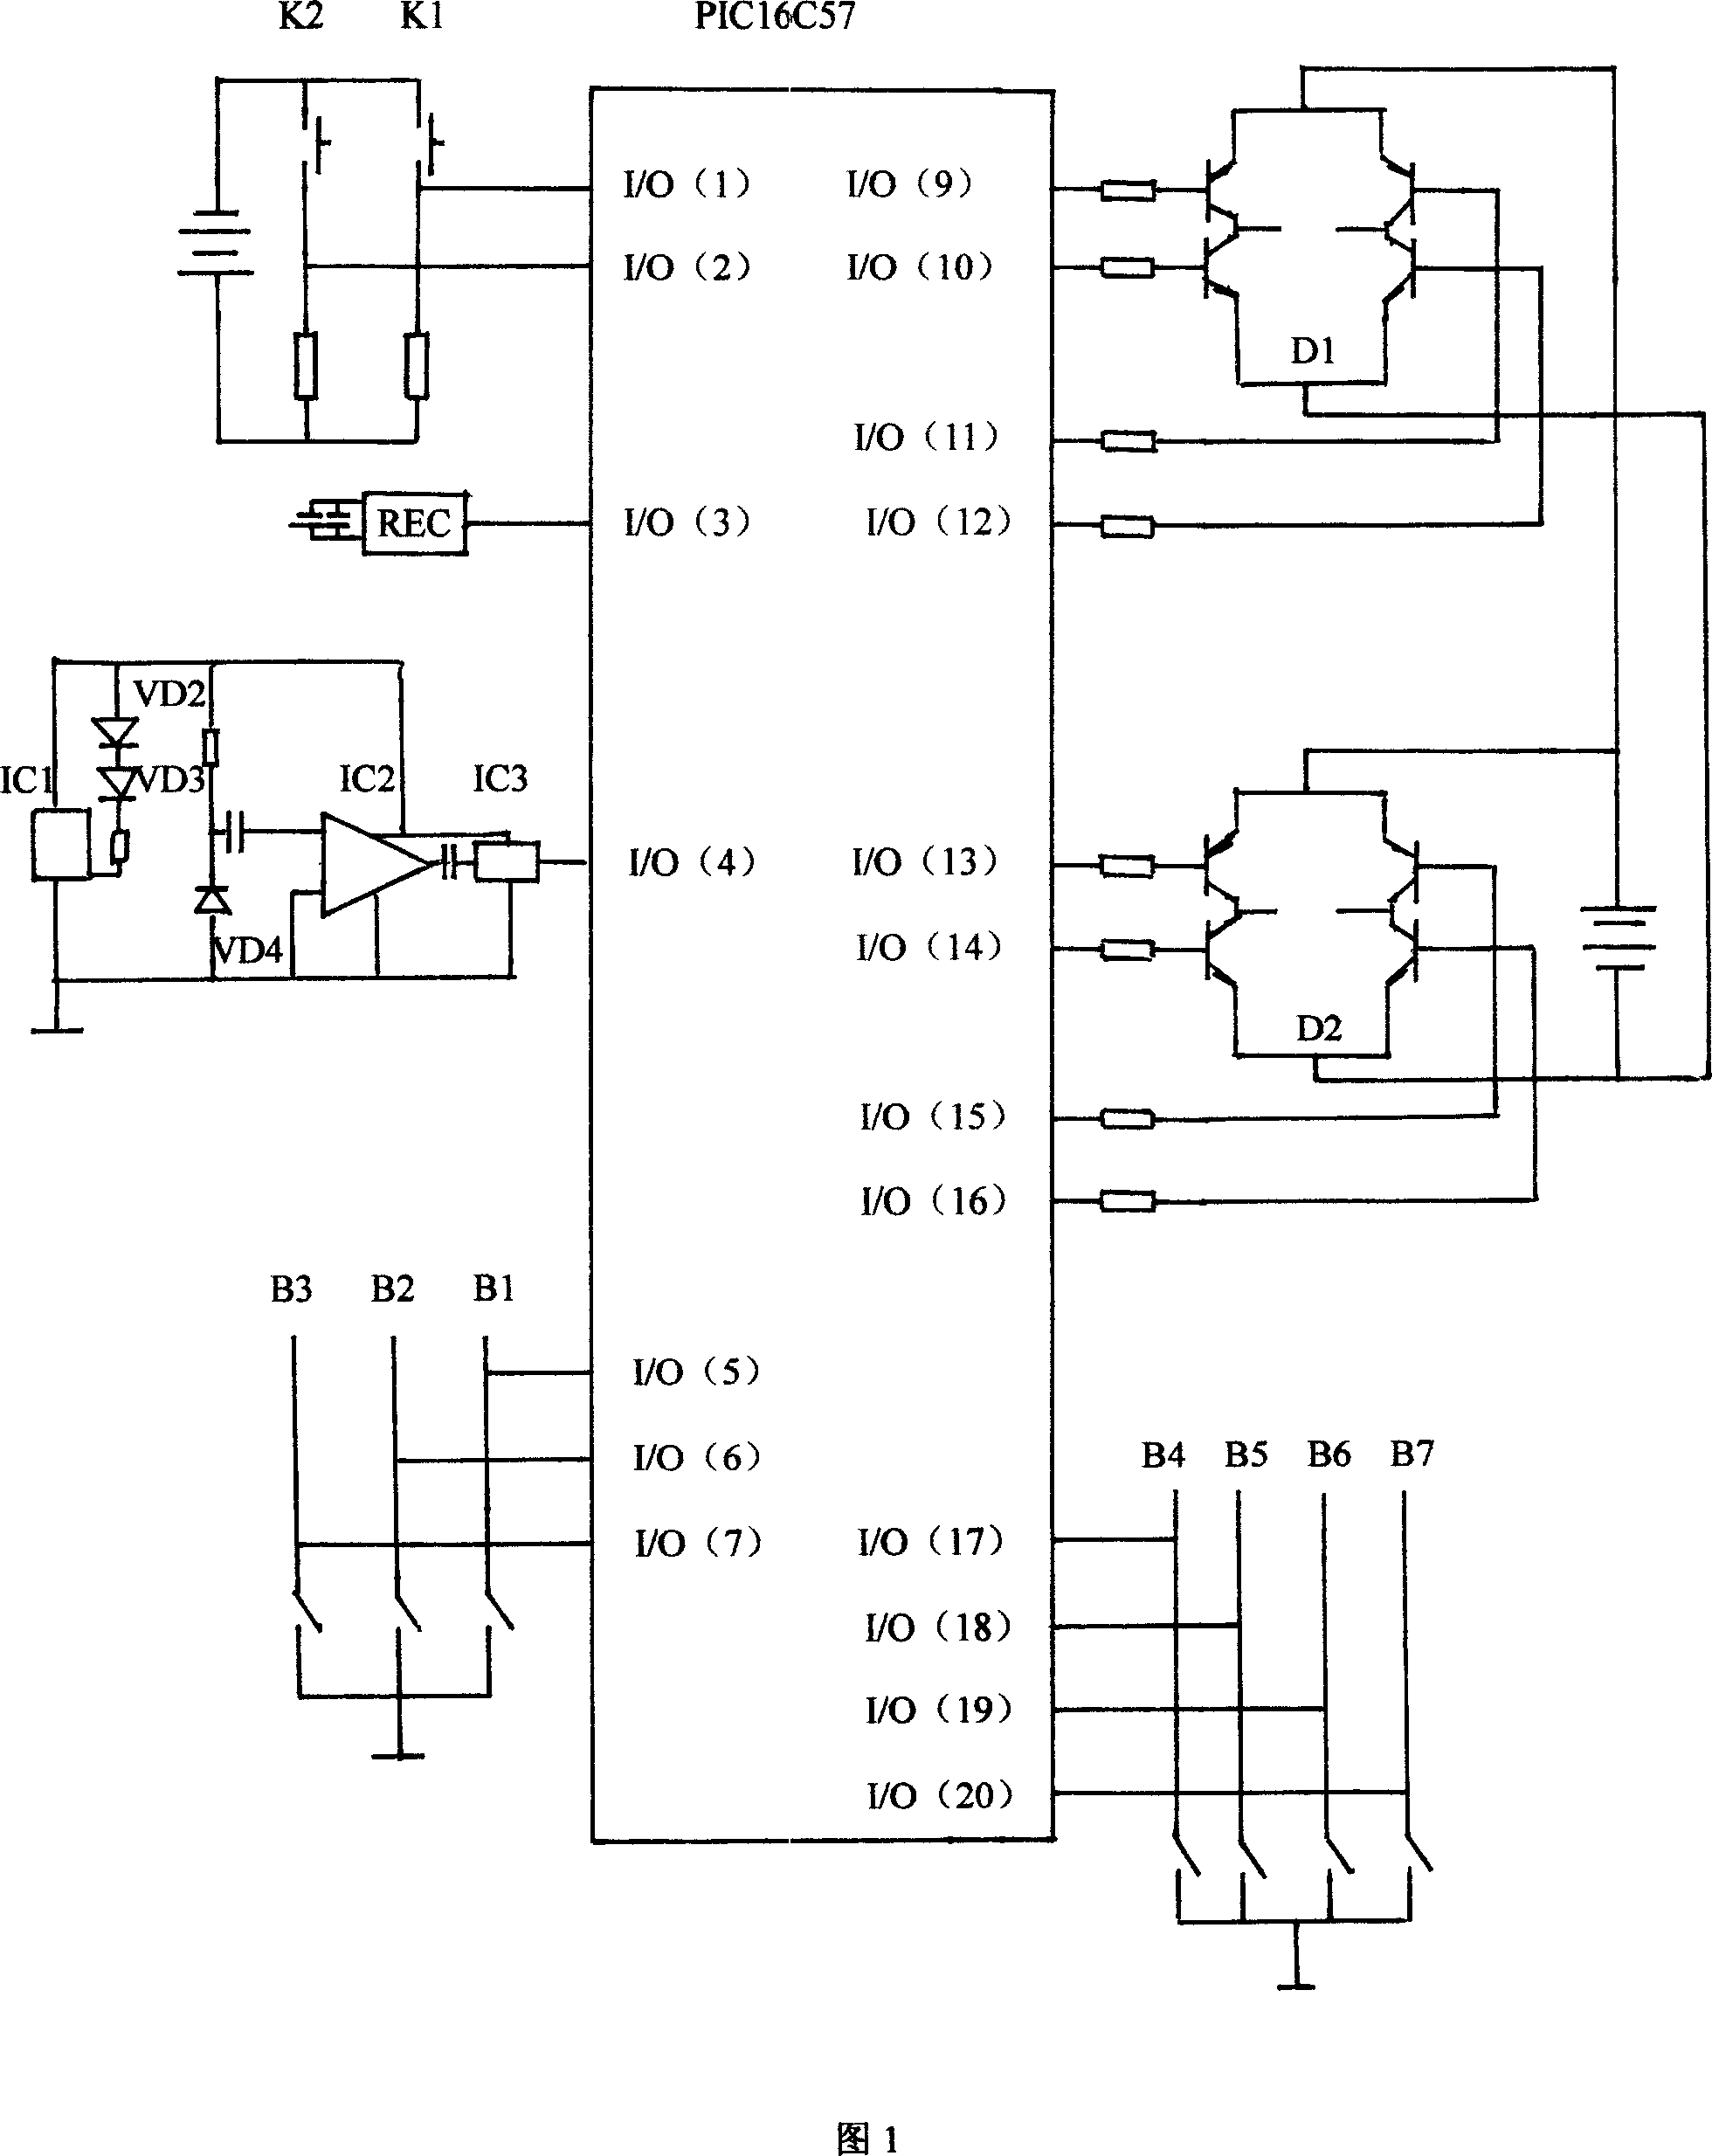 Design for common chip interface and peripheral circuit of embedded single-chip microcomputer in water-saving sanitary ware